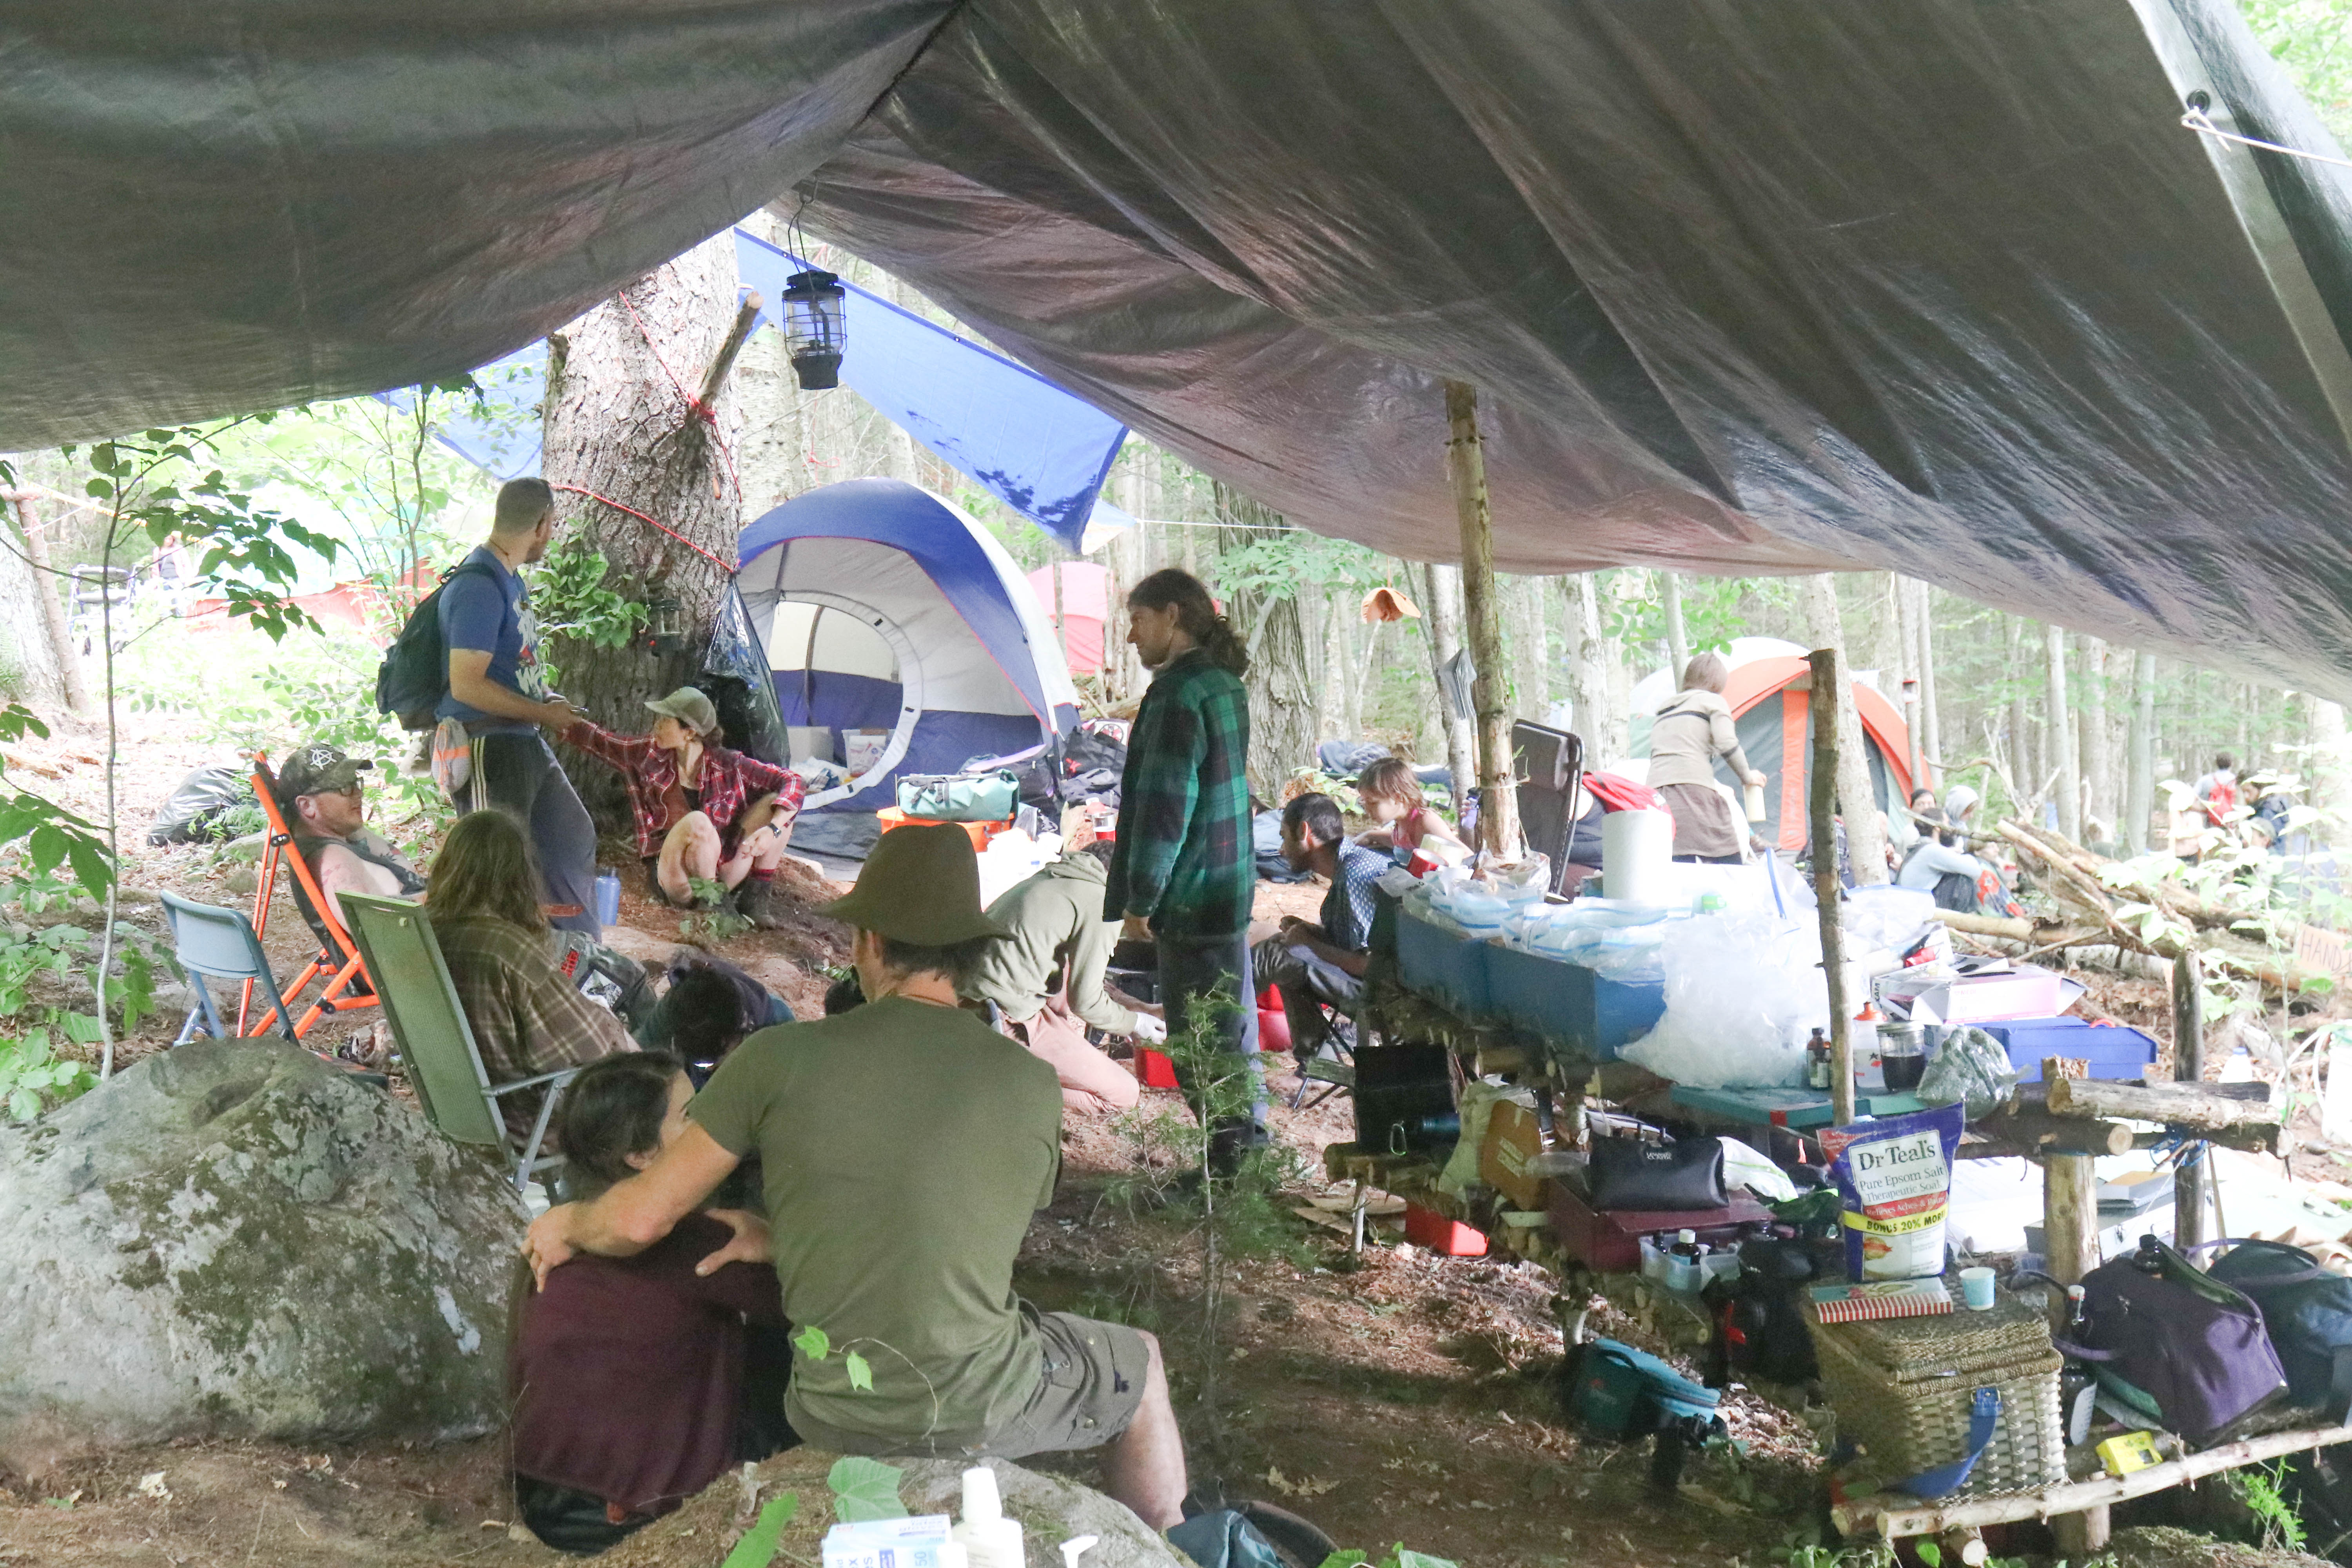 First aid station (CALM) at the 2016 Rainbow Gathering